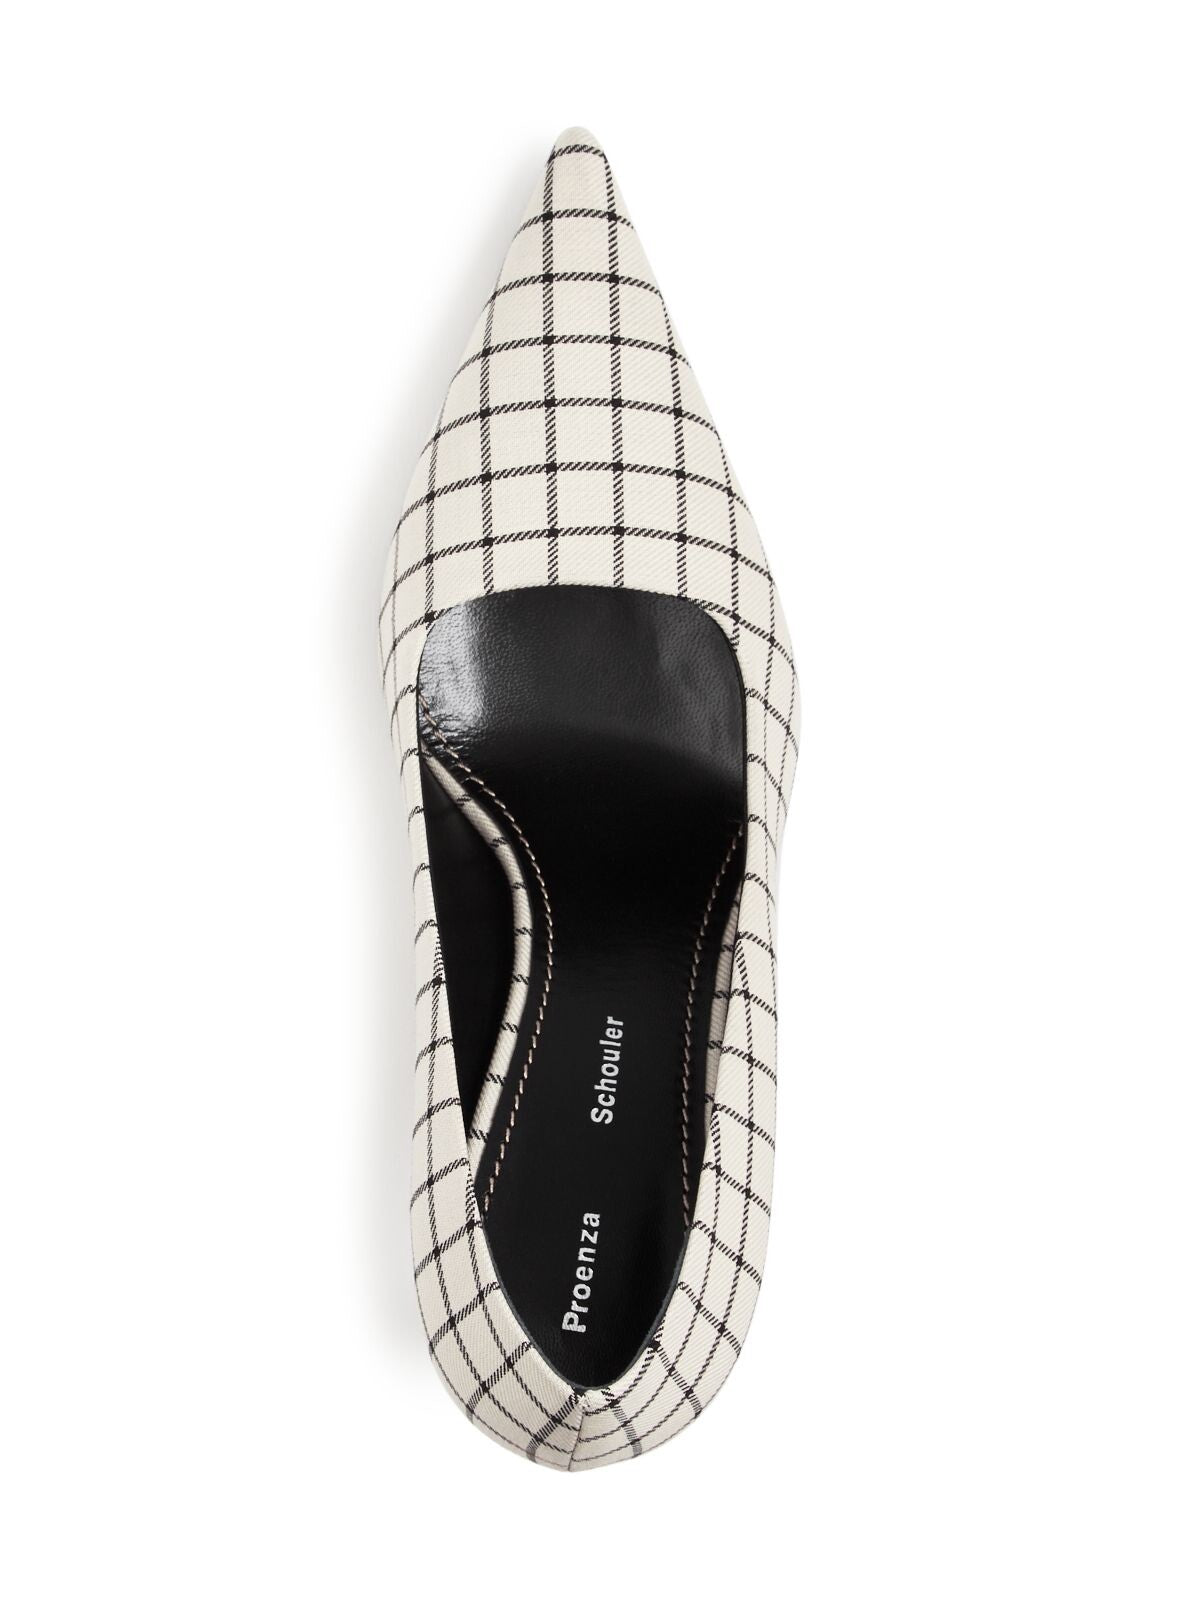 PROENZA SCHOULER Womens White Windowpane Curved Heel Padded Pointed Toe Slip On Dress Pumps Shoes 38